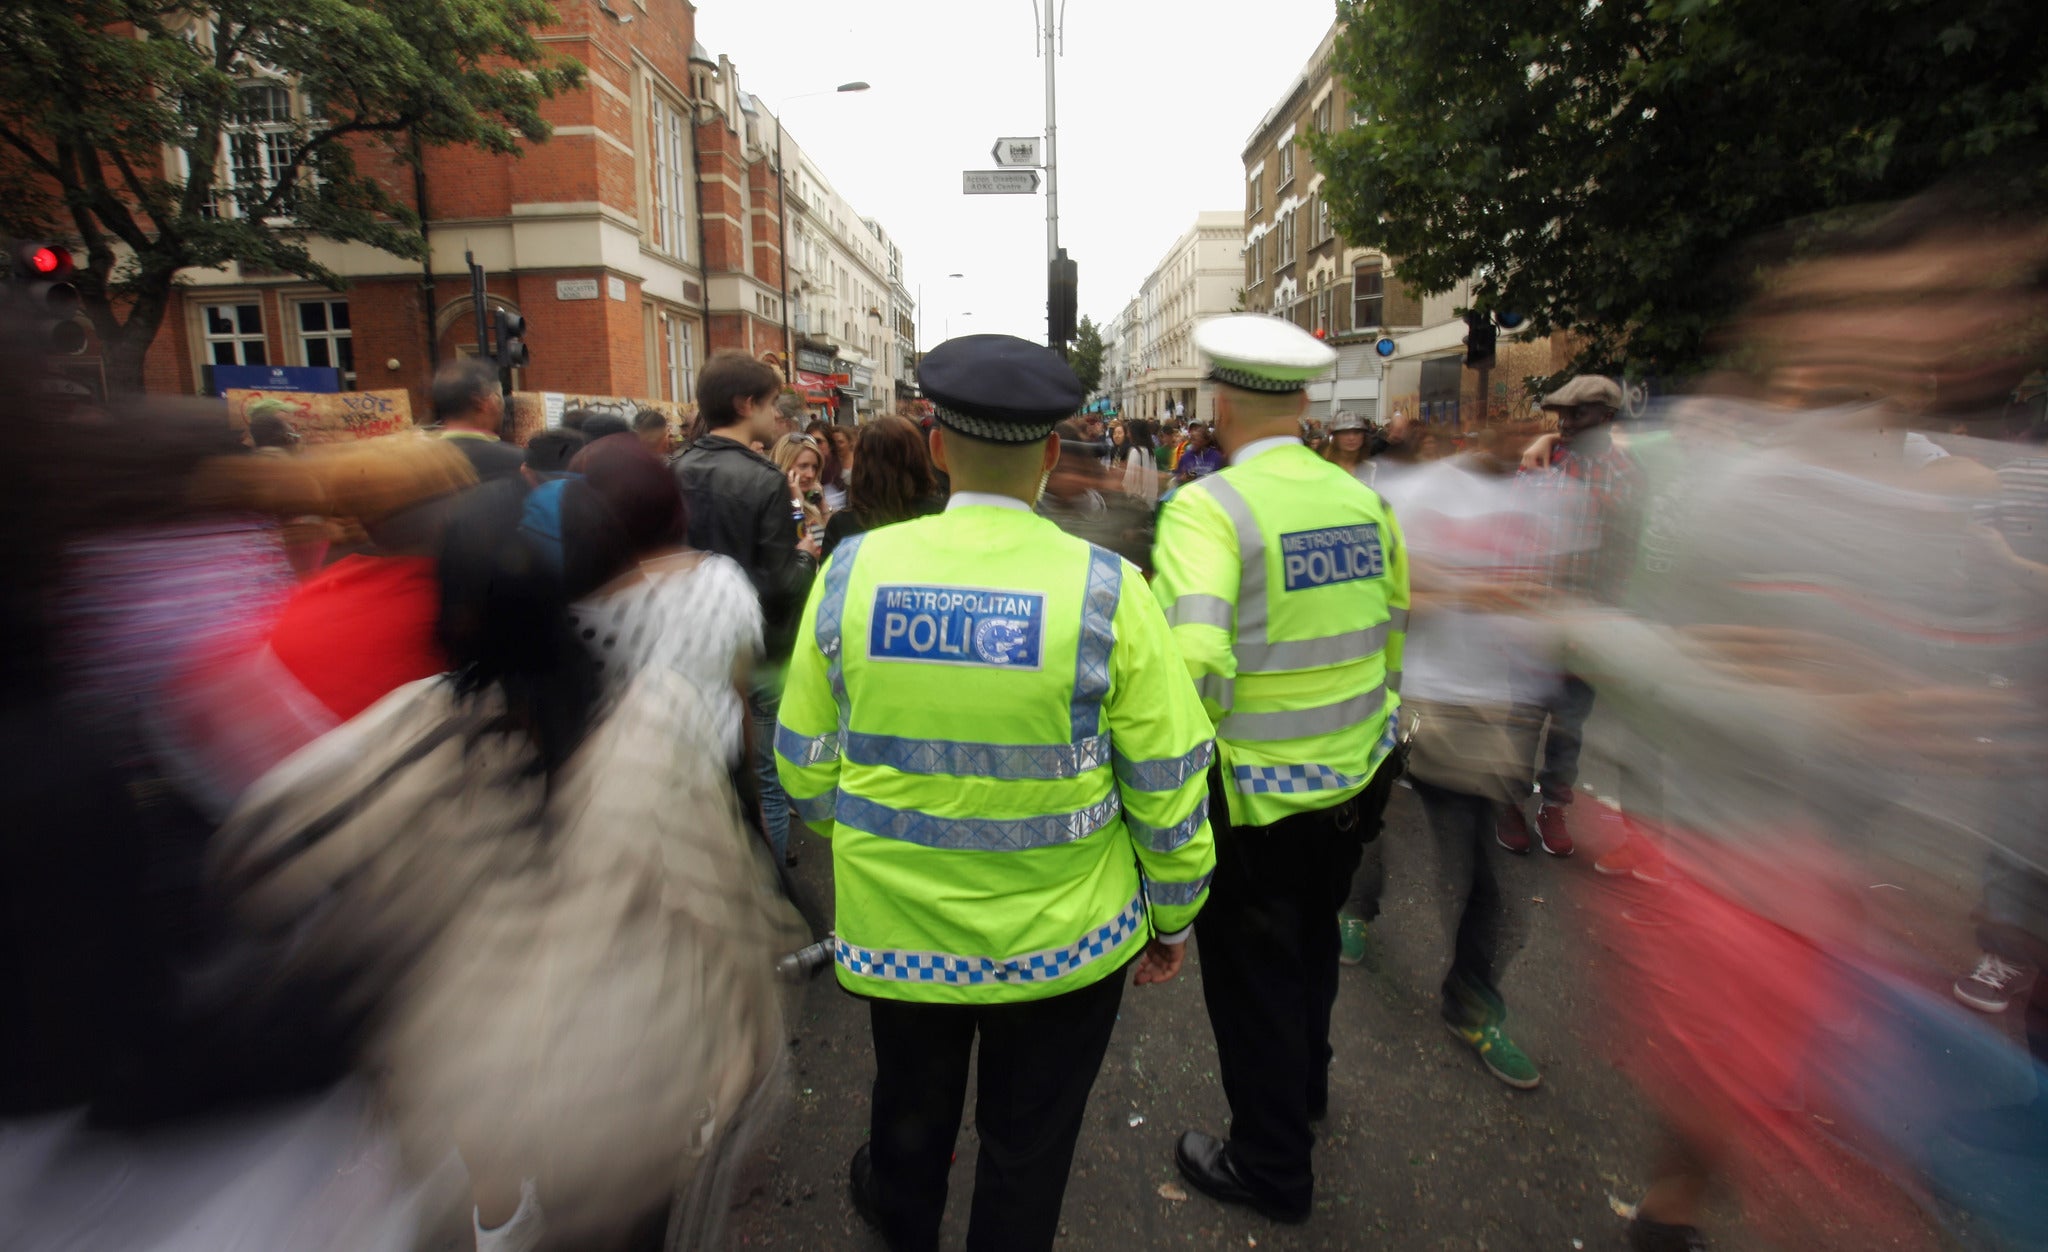 Police officers monitor the crowds at the Notting Hill Carnival on August 29, 2011 in London, England